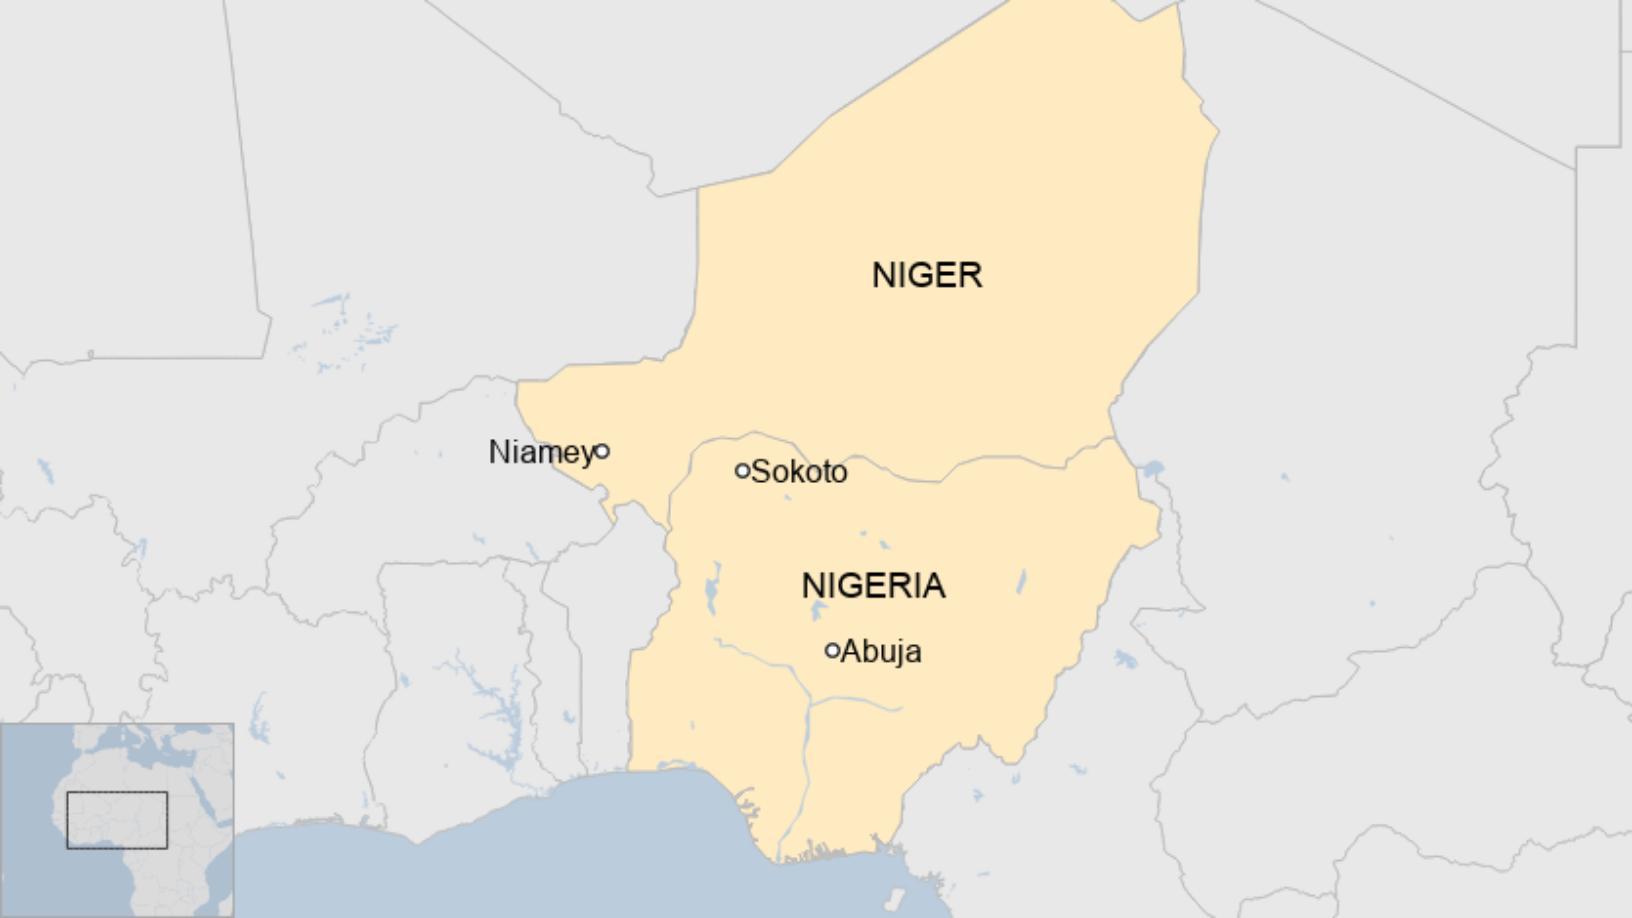 Map of Nigeria and Niger